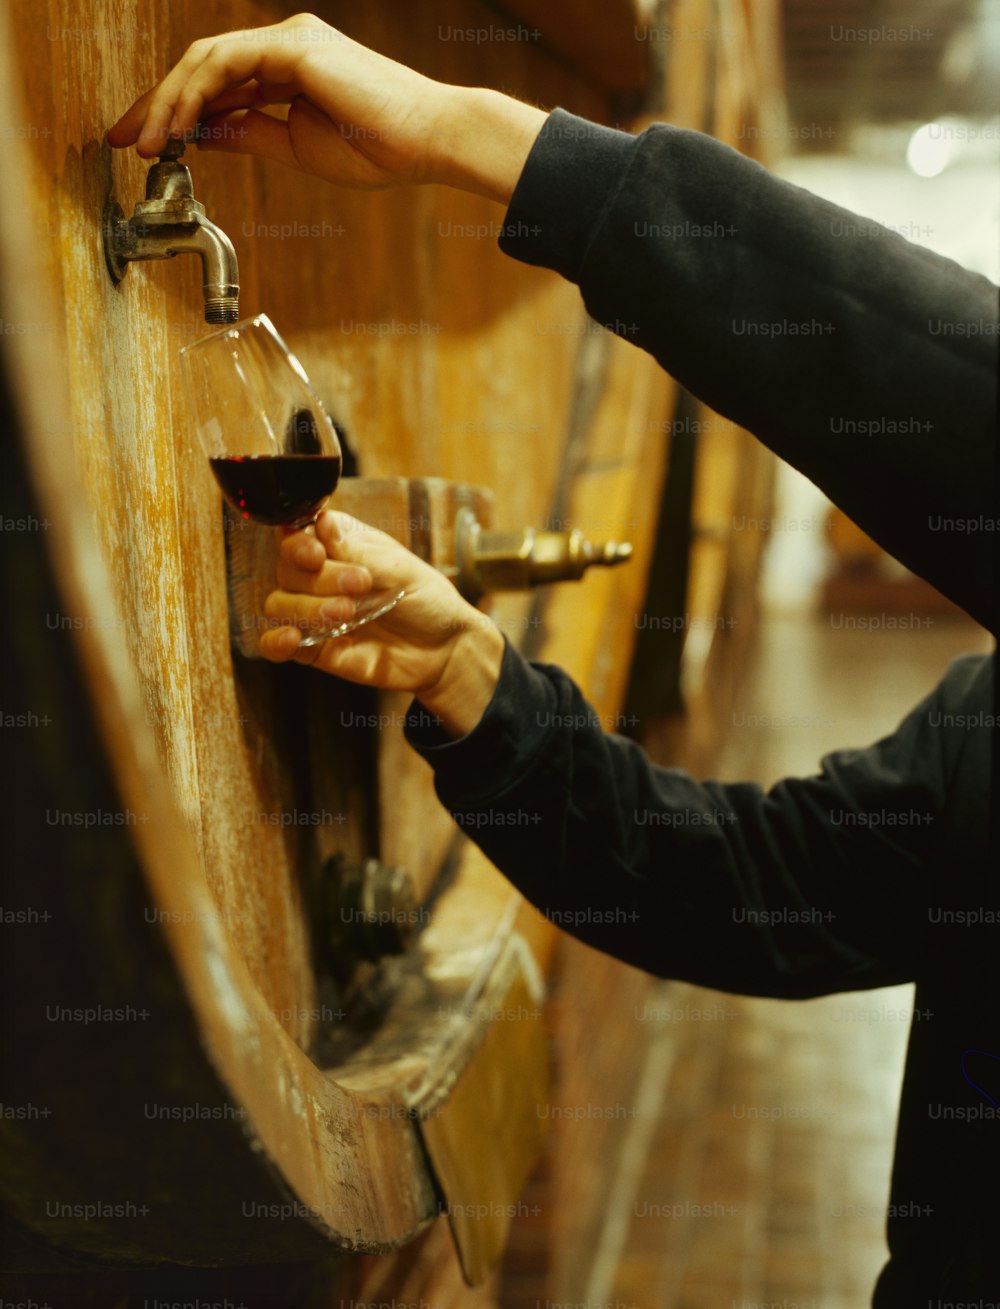 a person holding a glass of wine in front of a wooden barrel